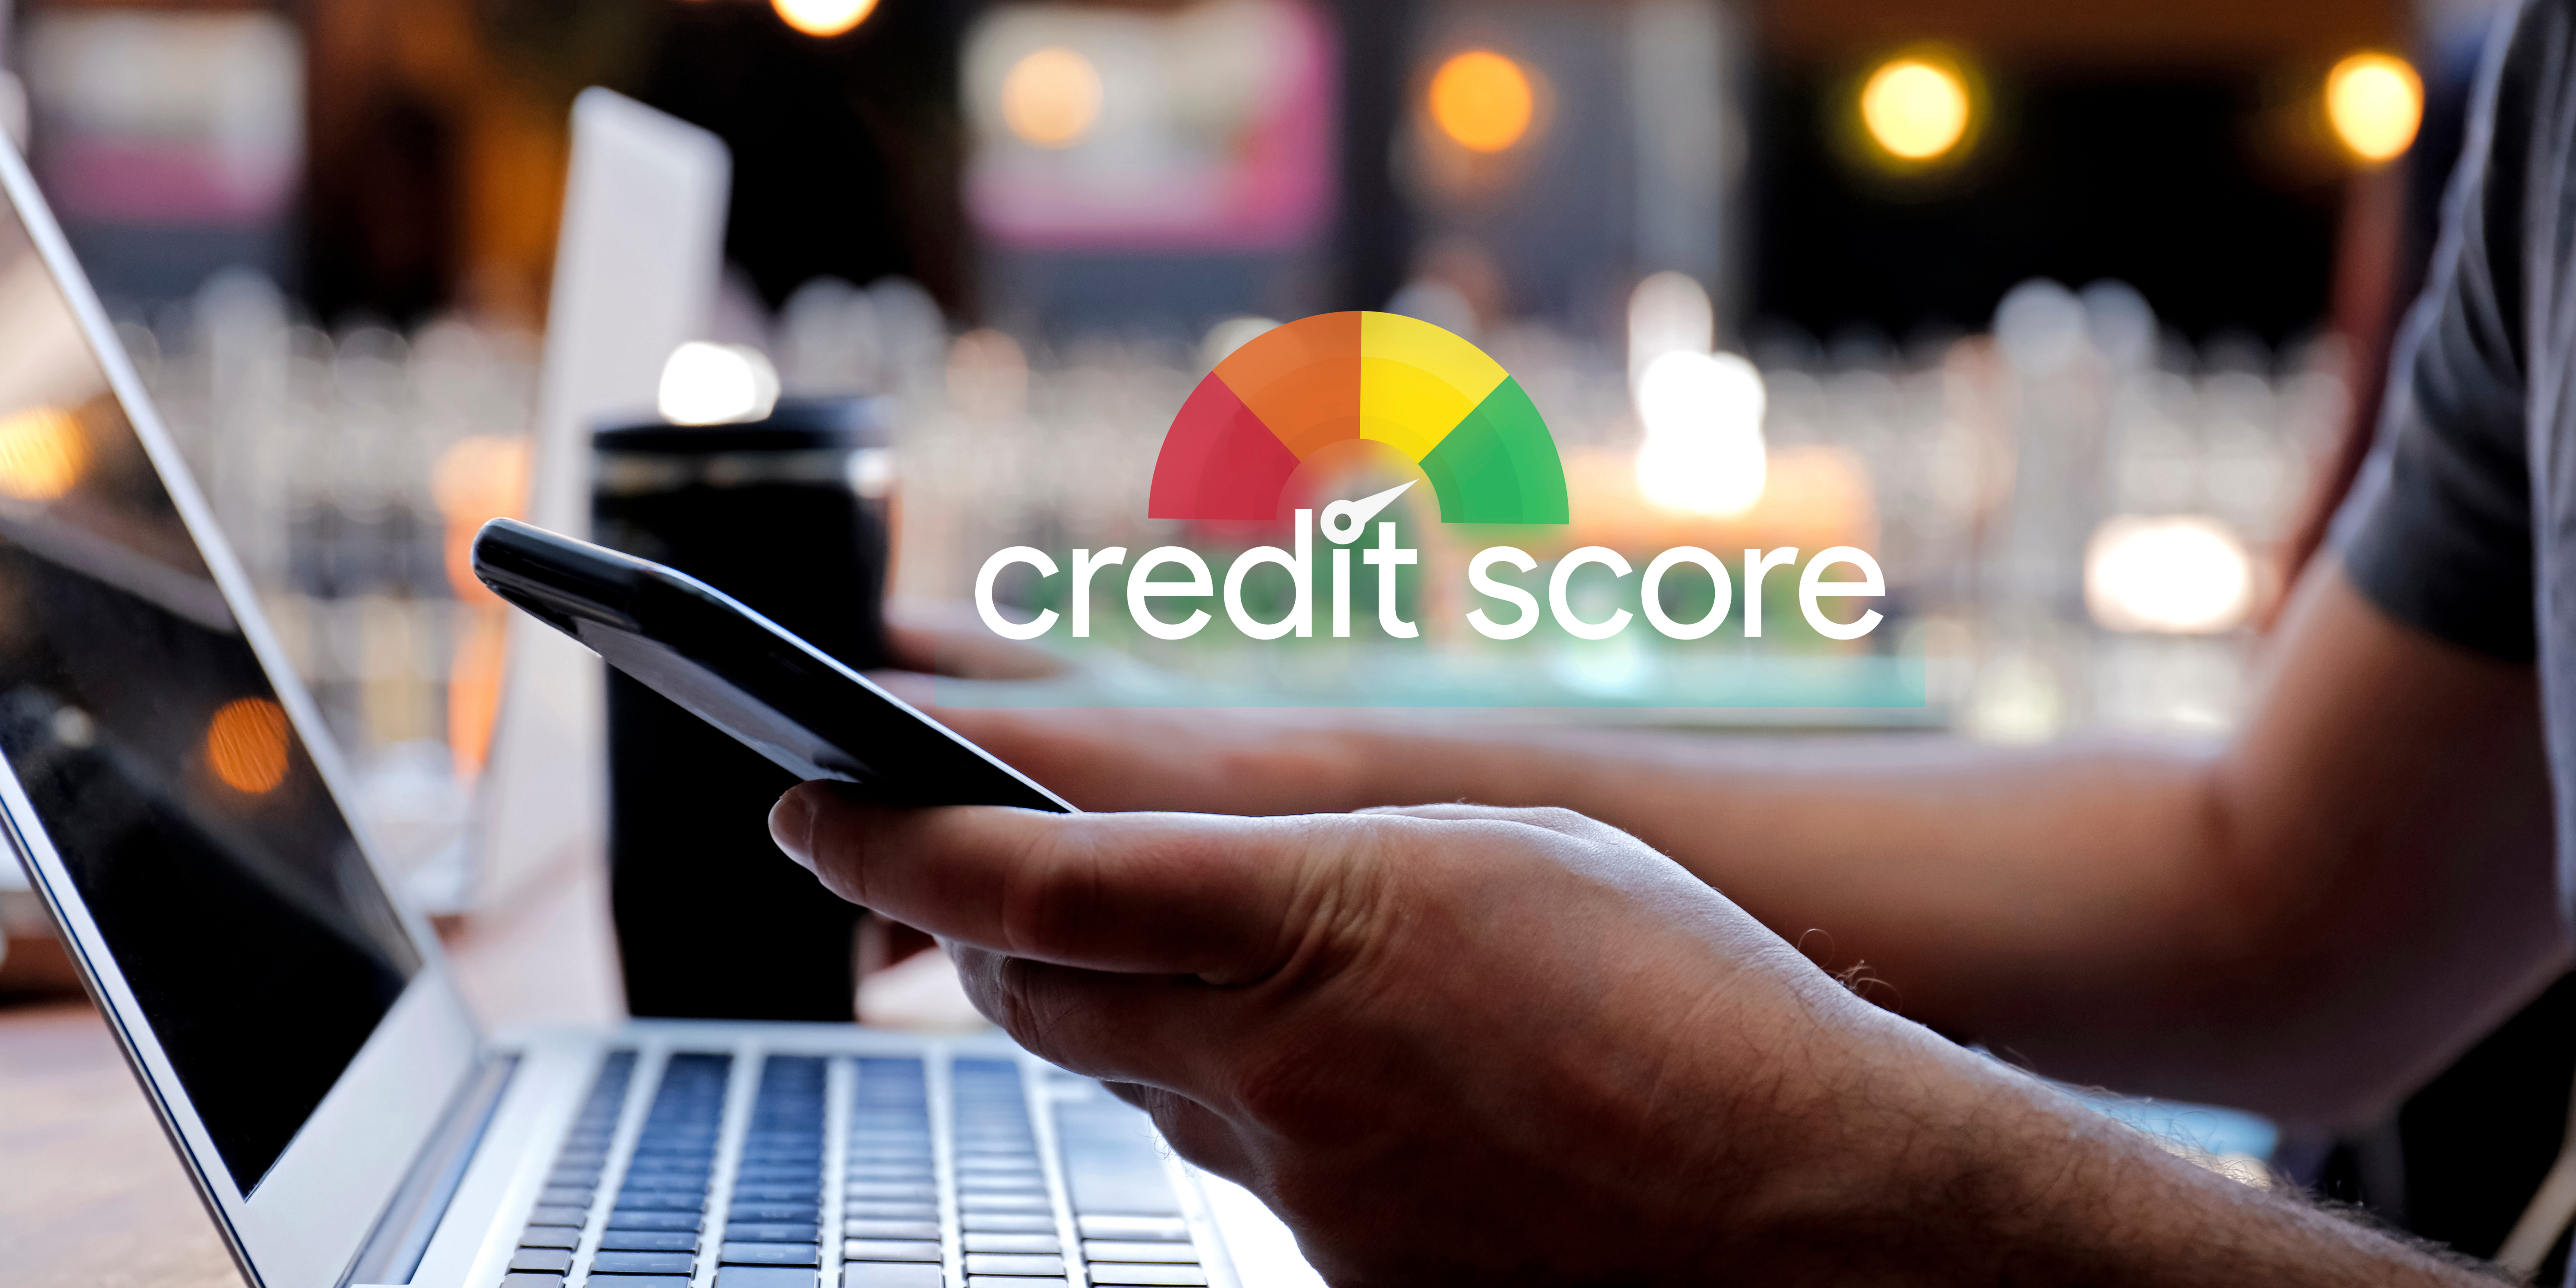 How Do You Build Credit Without a Credit Card?